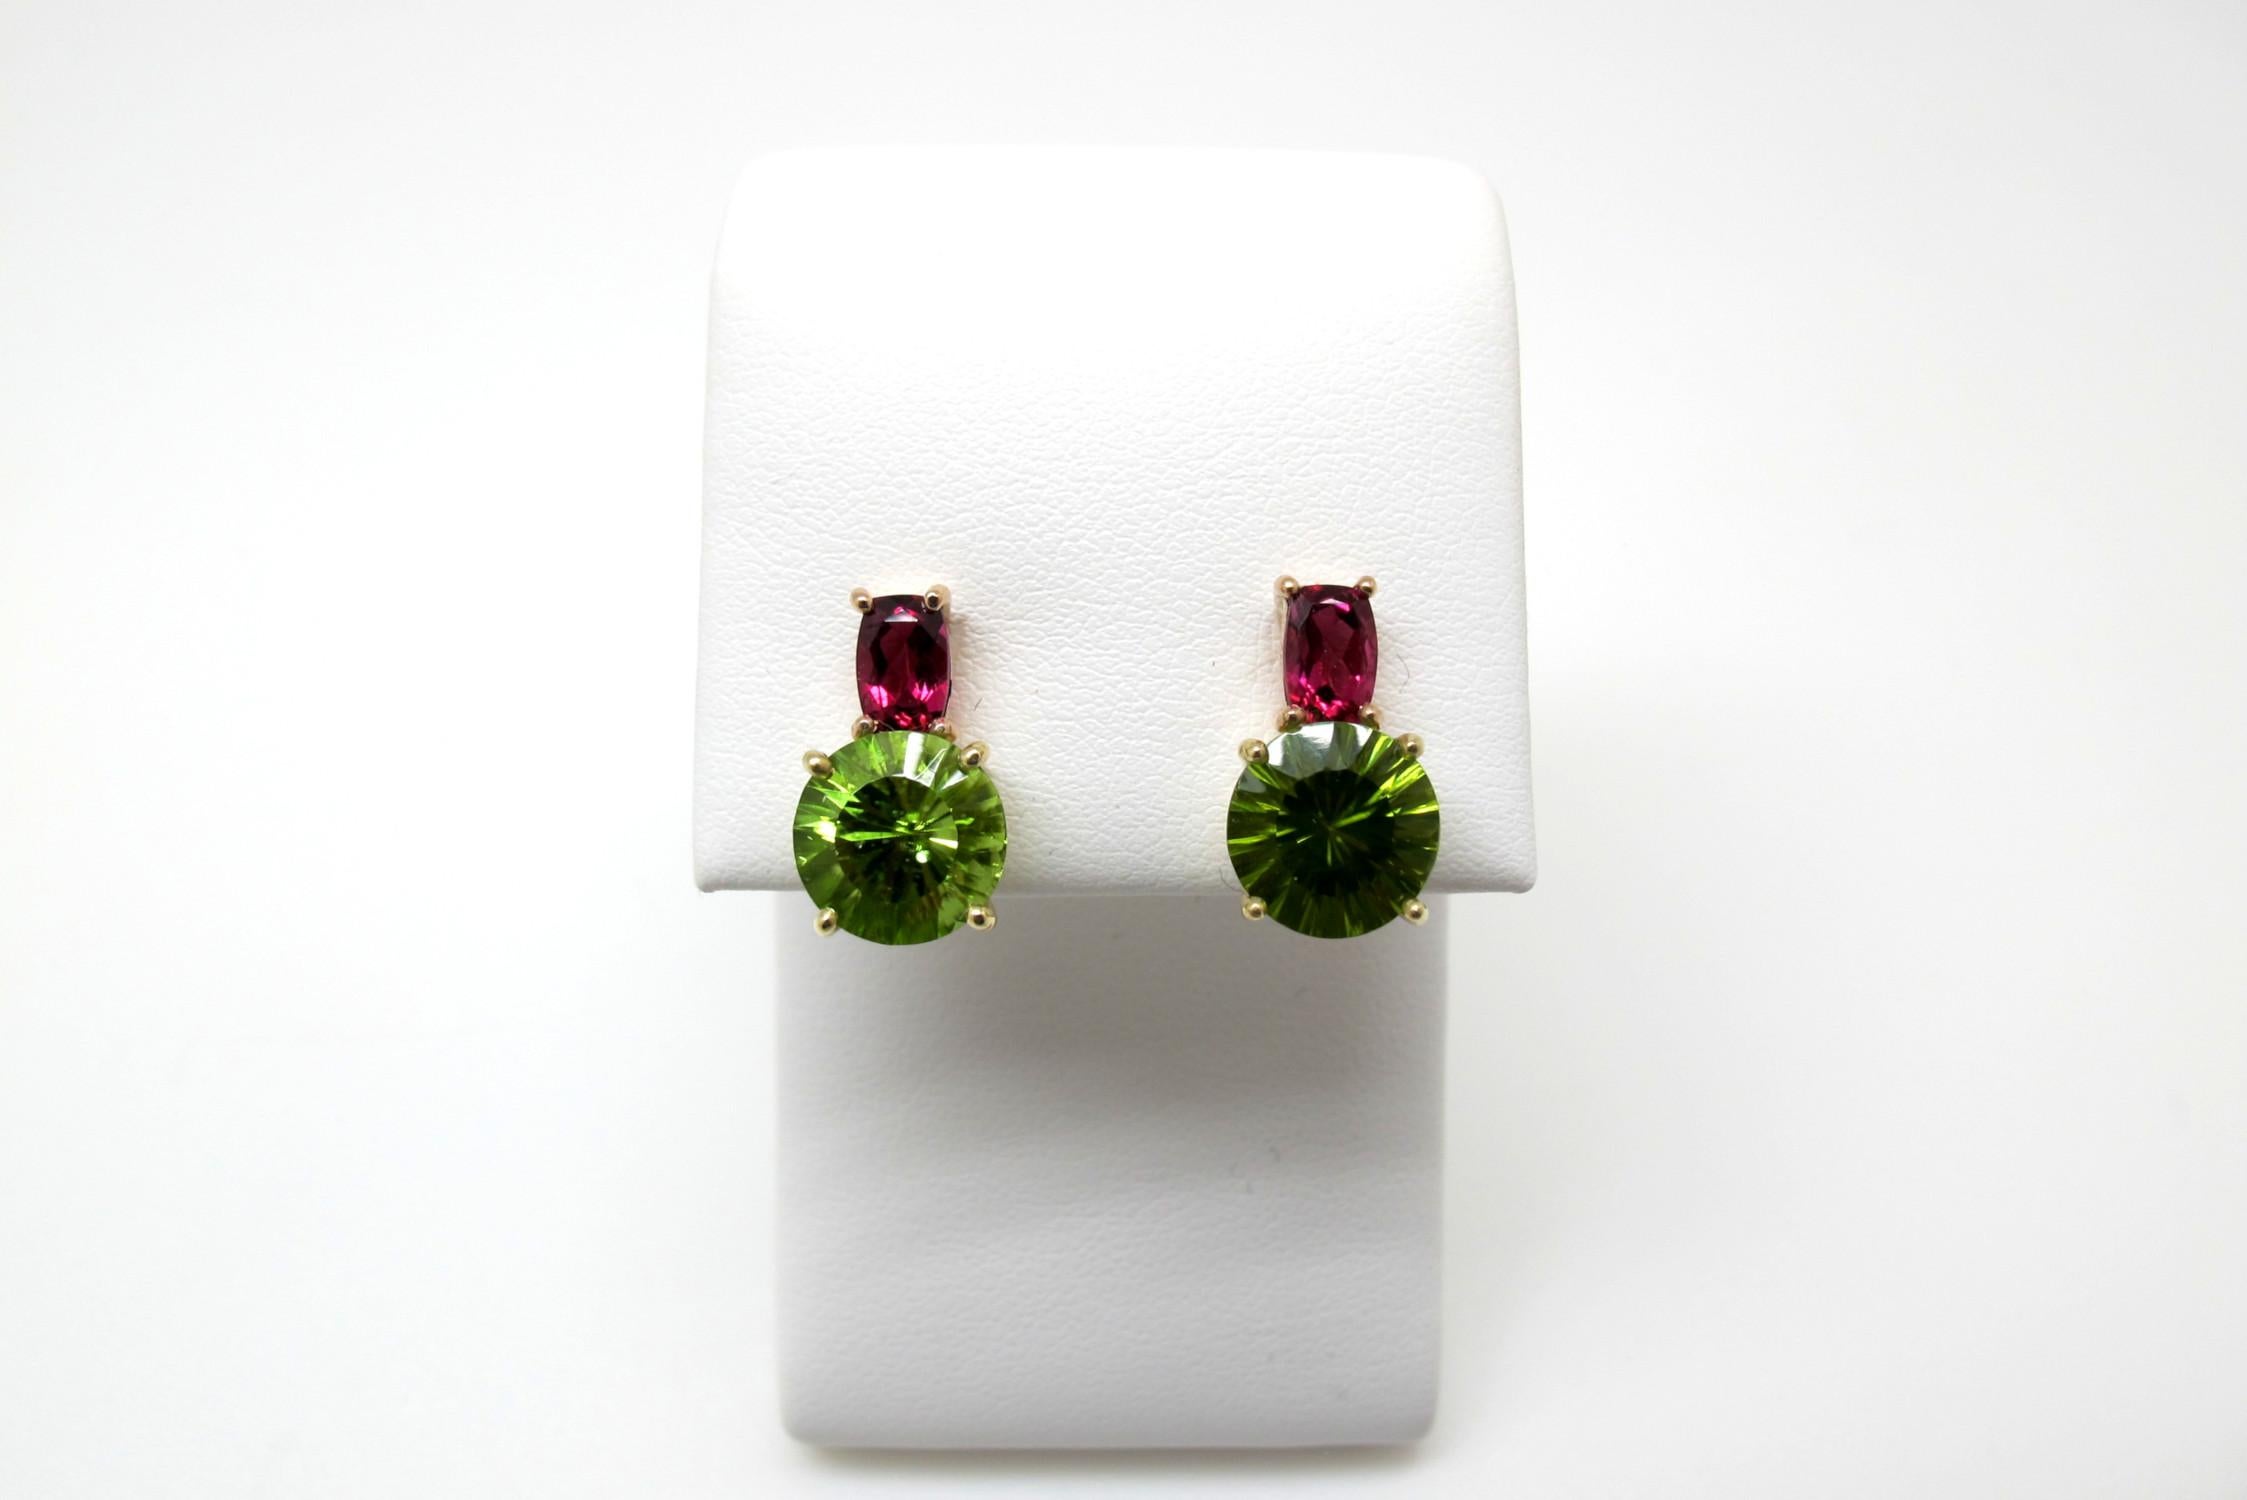 These earrings are bursting with vibrant color! We have paired bright 